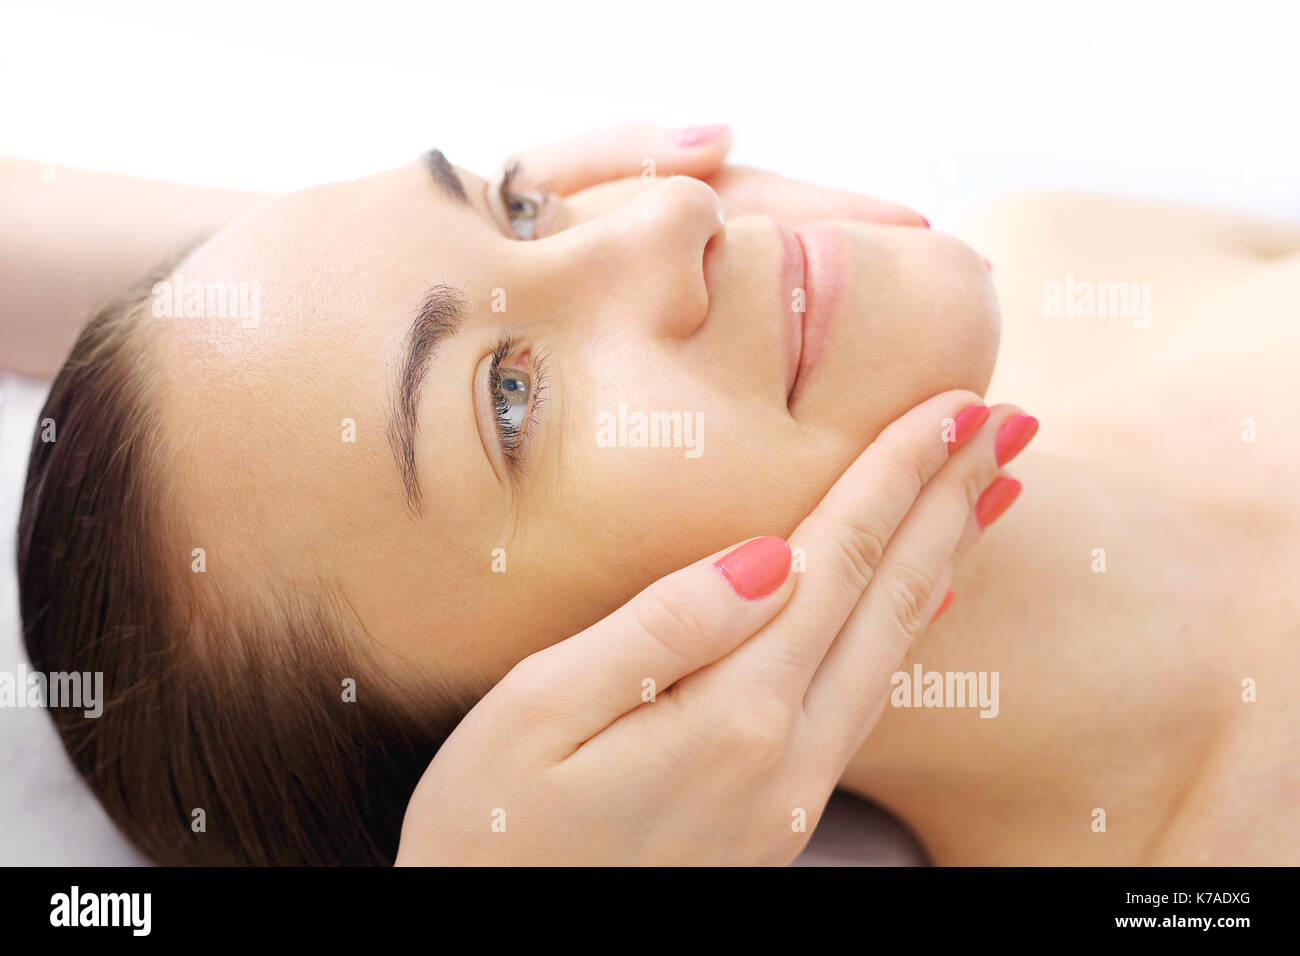 Face massage. Woman in beauty parlor during facial massage.  Face massage. Woman in beauty parlor during facial massage. Stock Photo